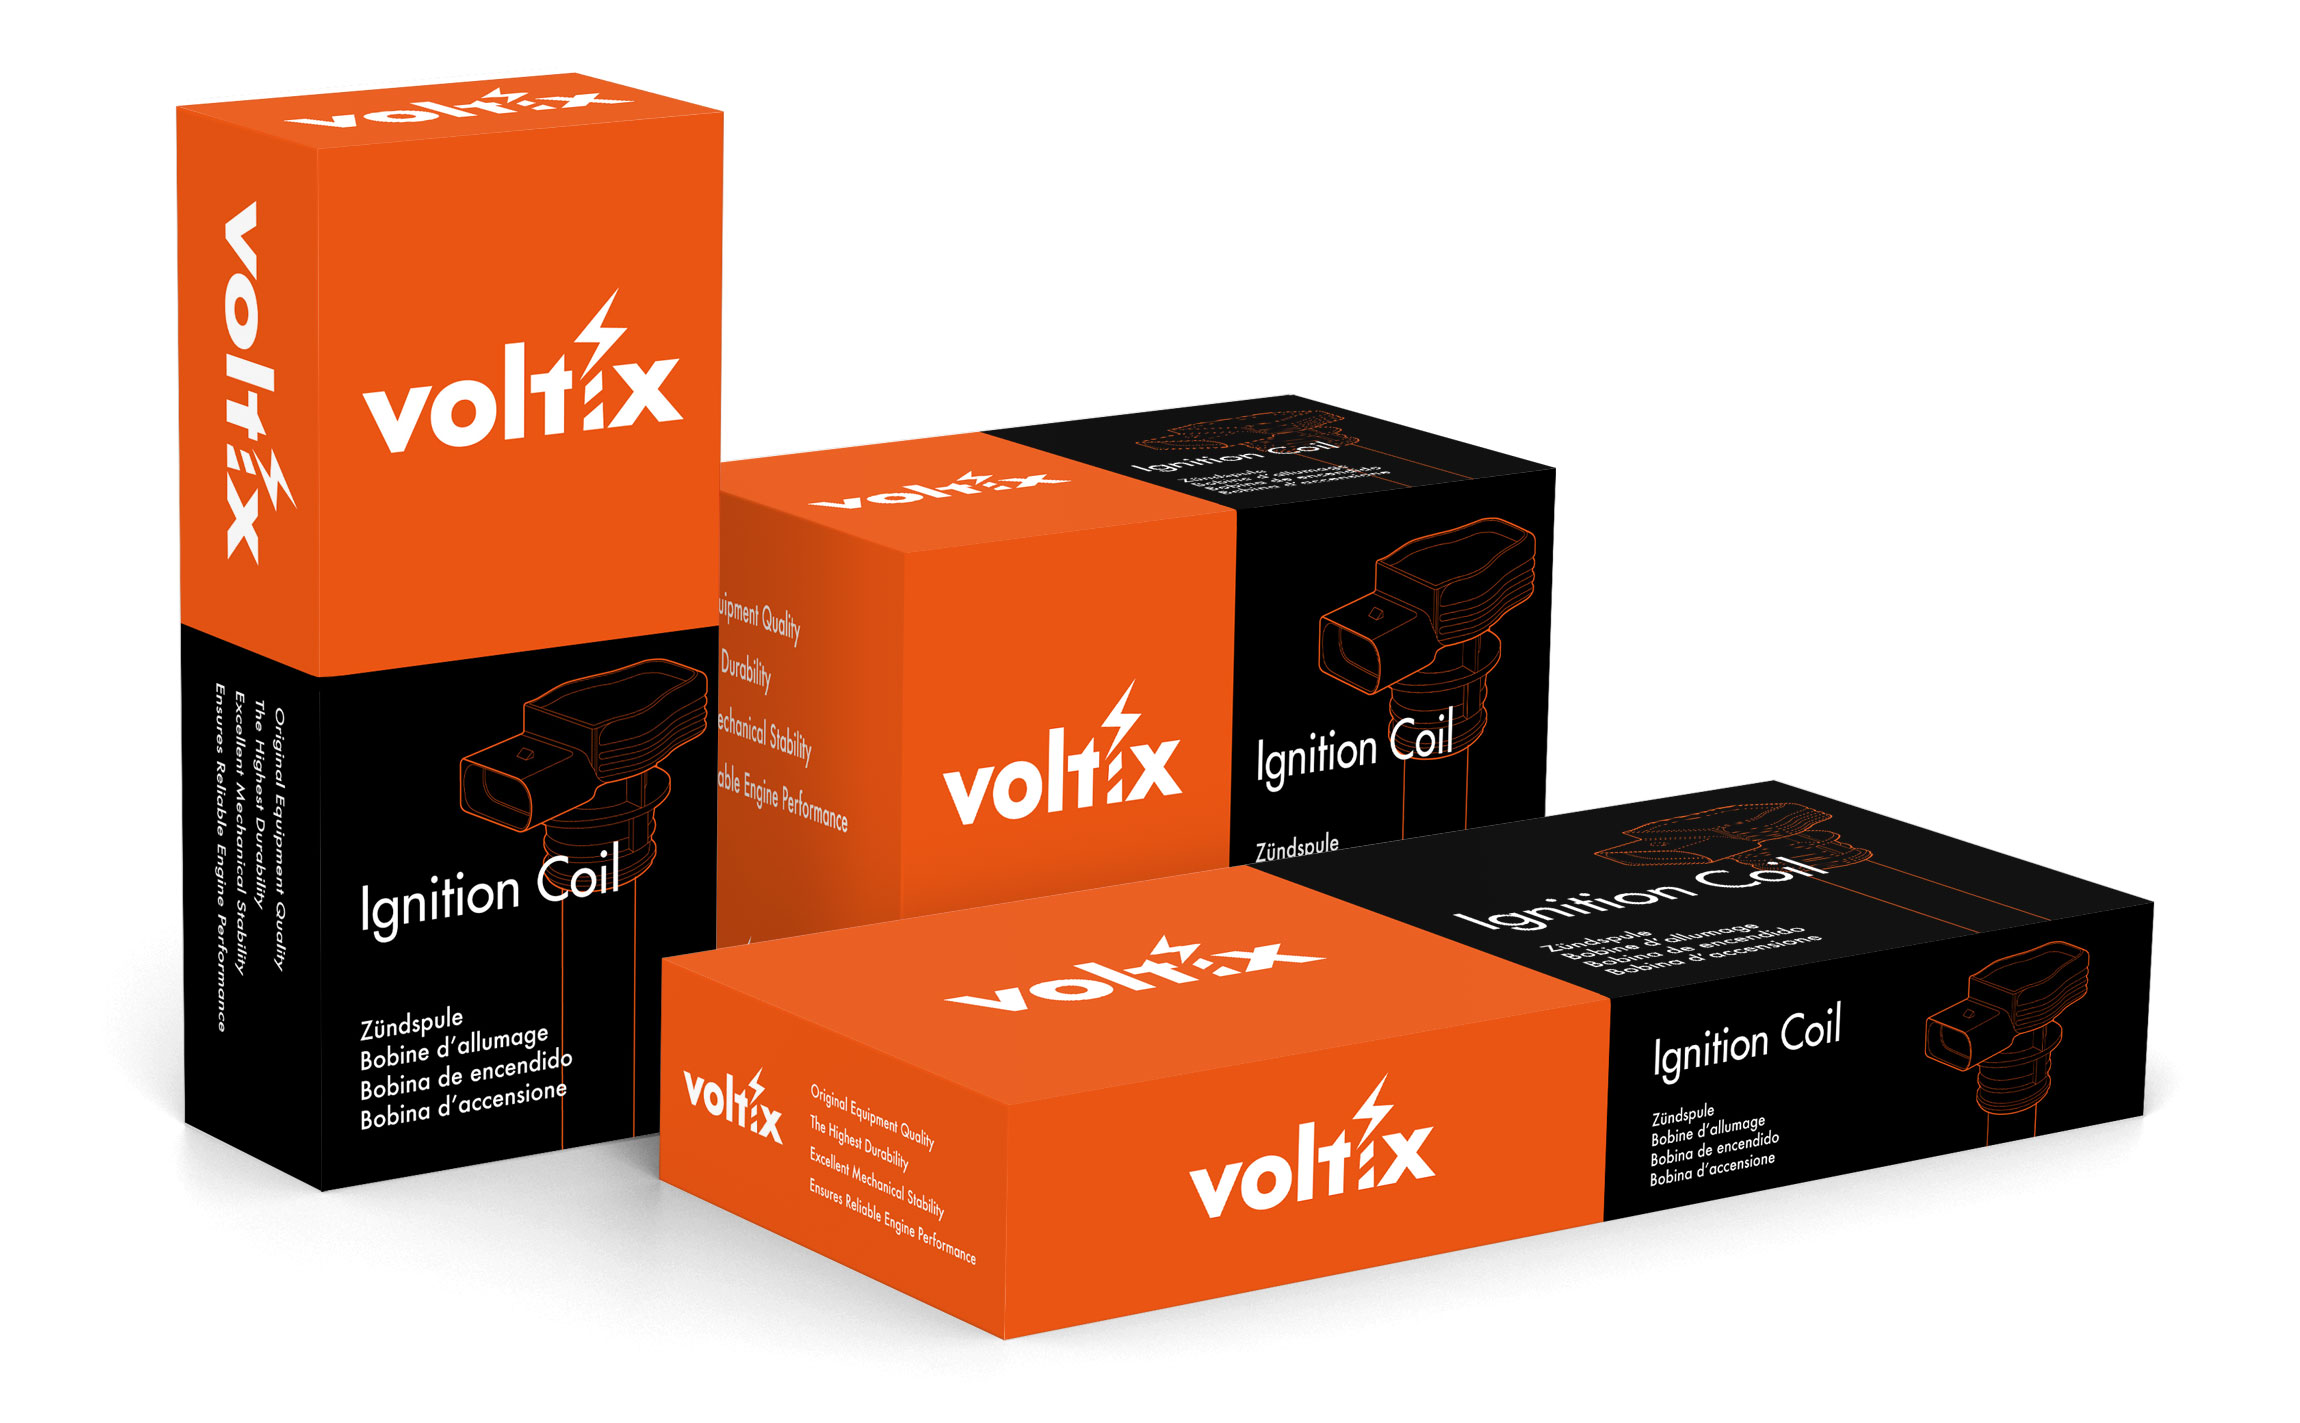 Ignition Coil Branding & Packaging